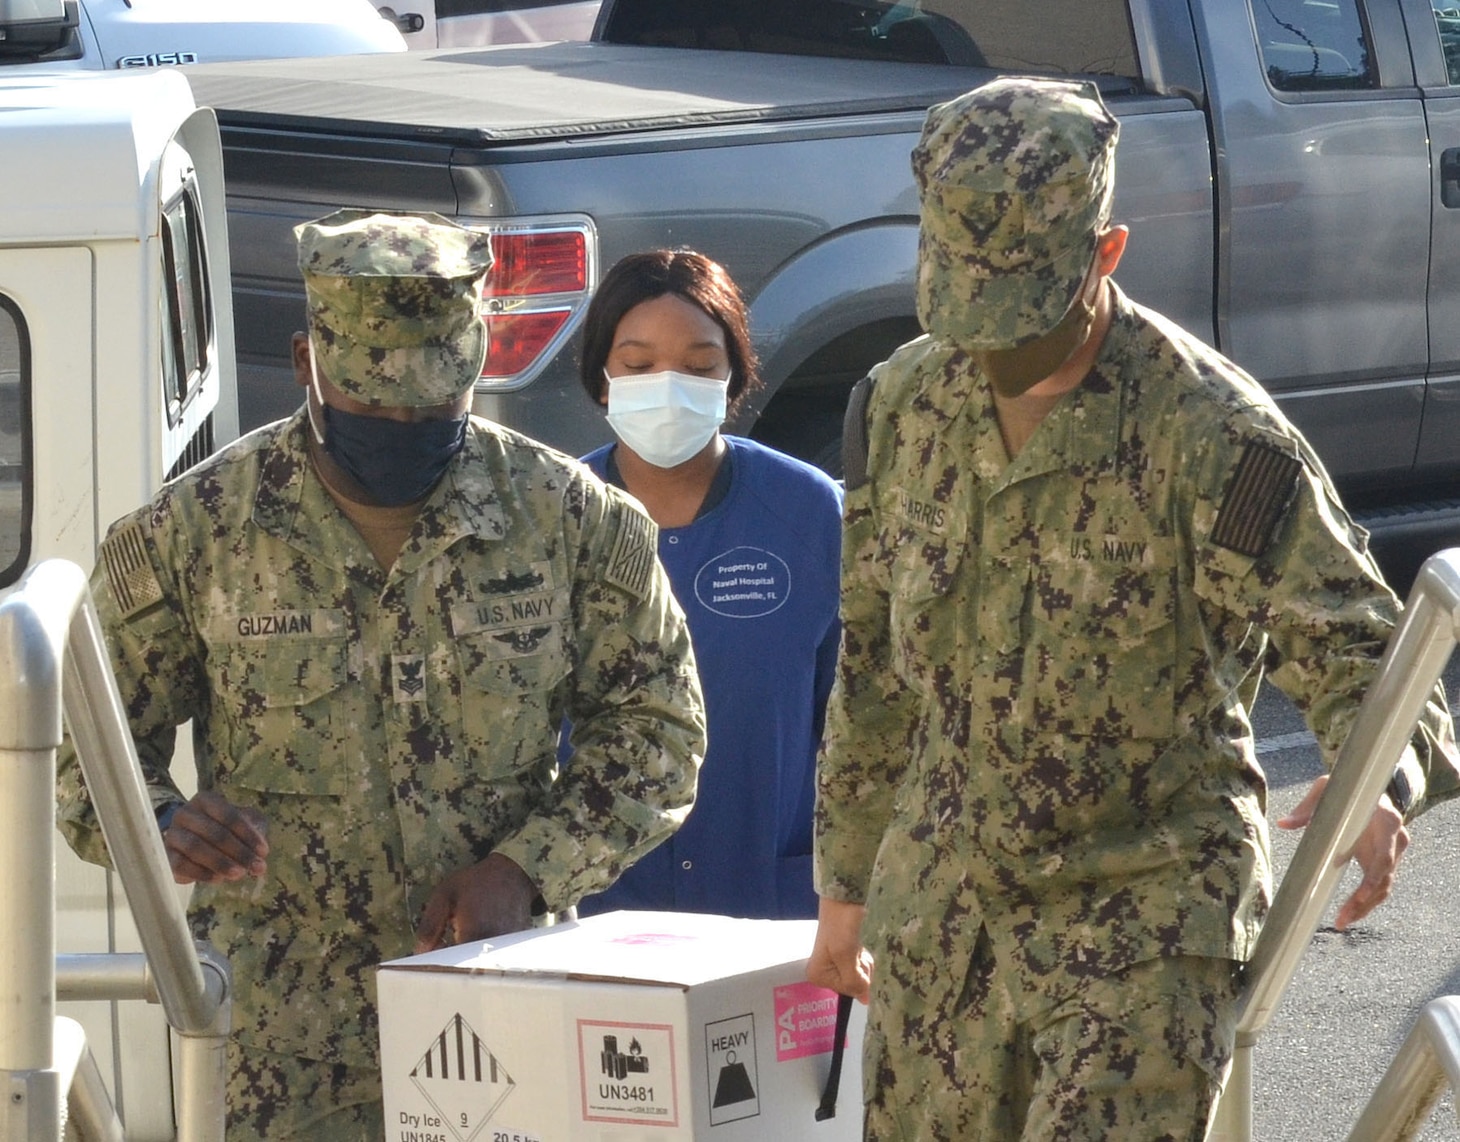 Sailors carry a container with COVID-19 vaccine at Naval Hospital Jacksonville.